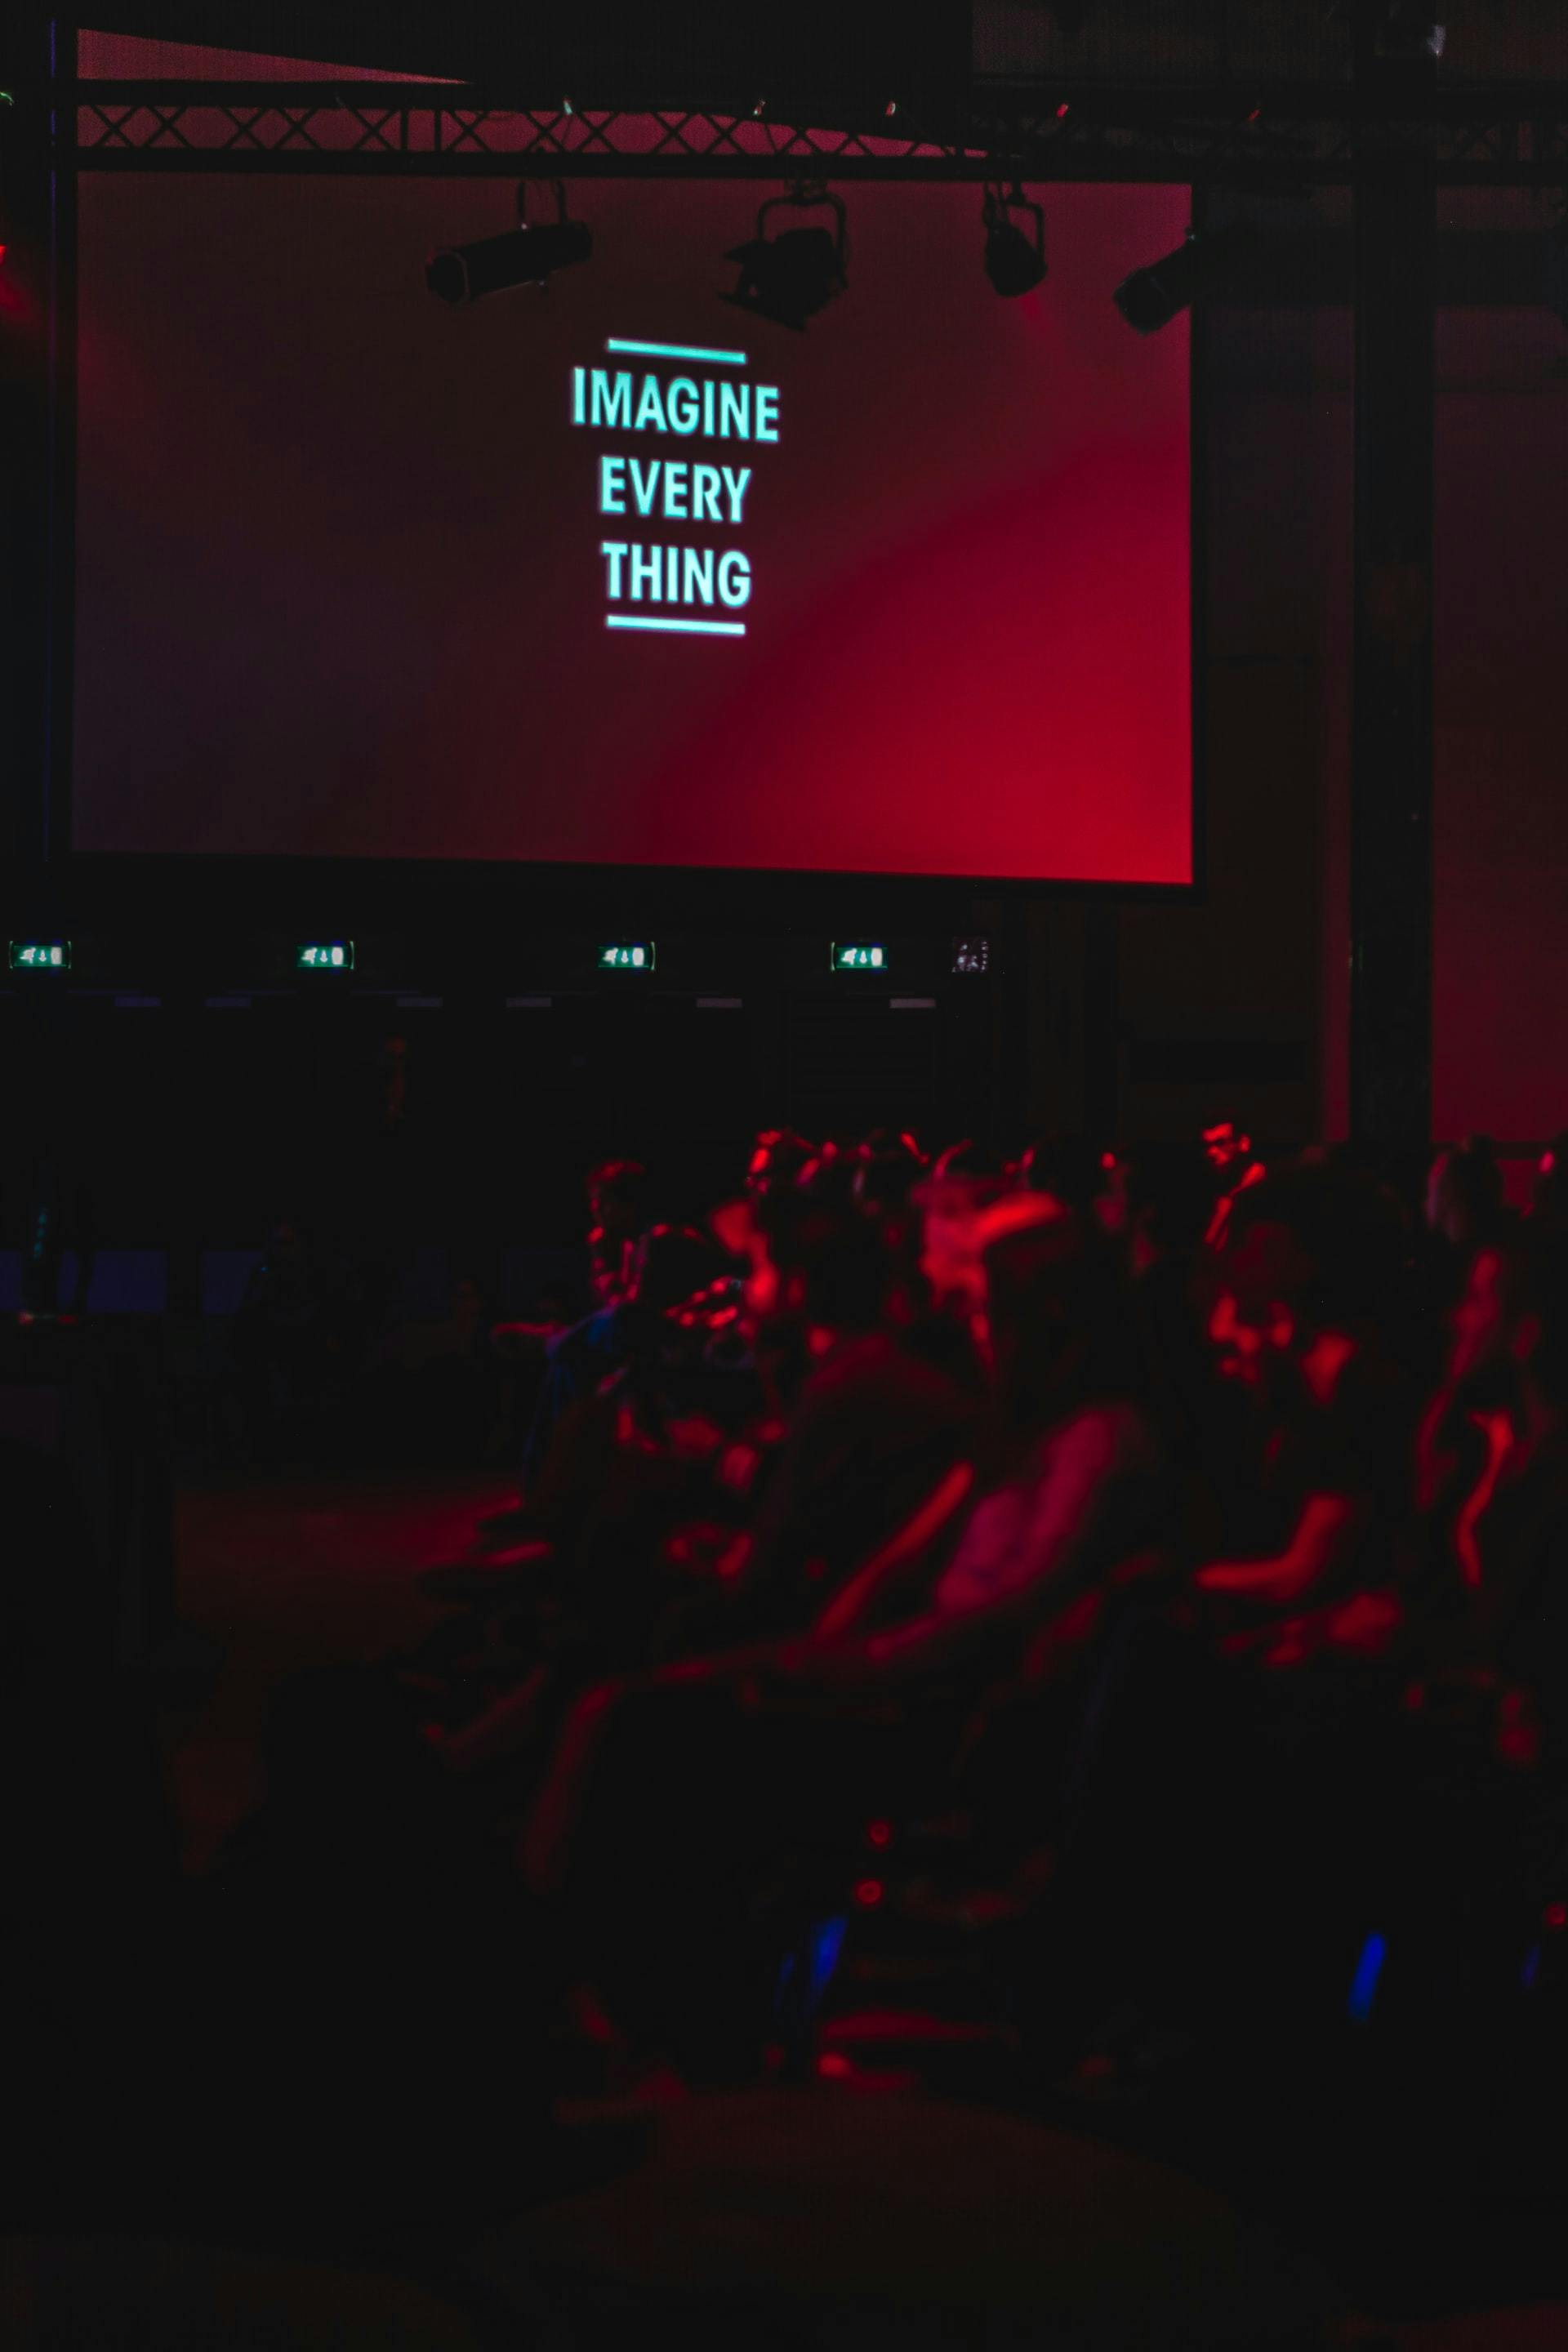 audience looking at red screen with "imagine every thing" displayed.